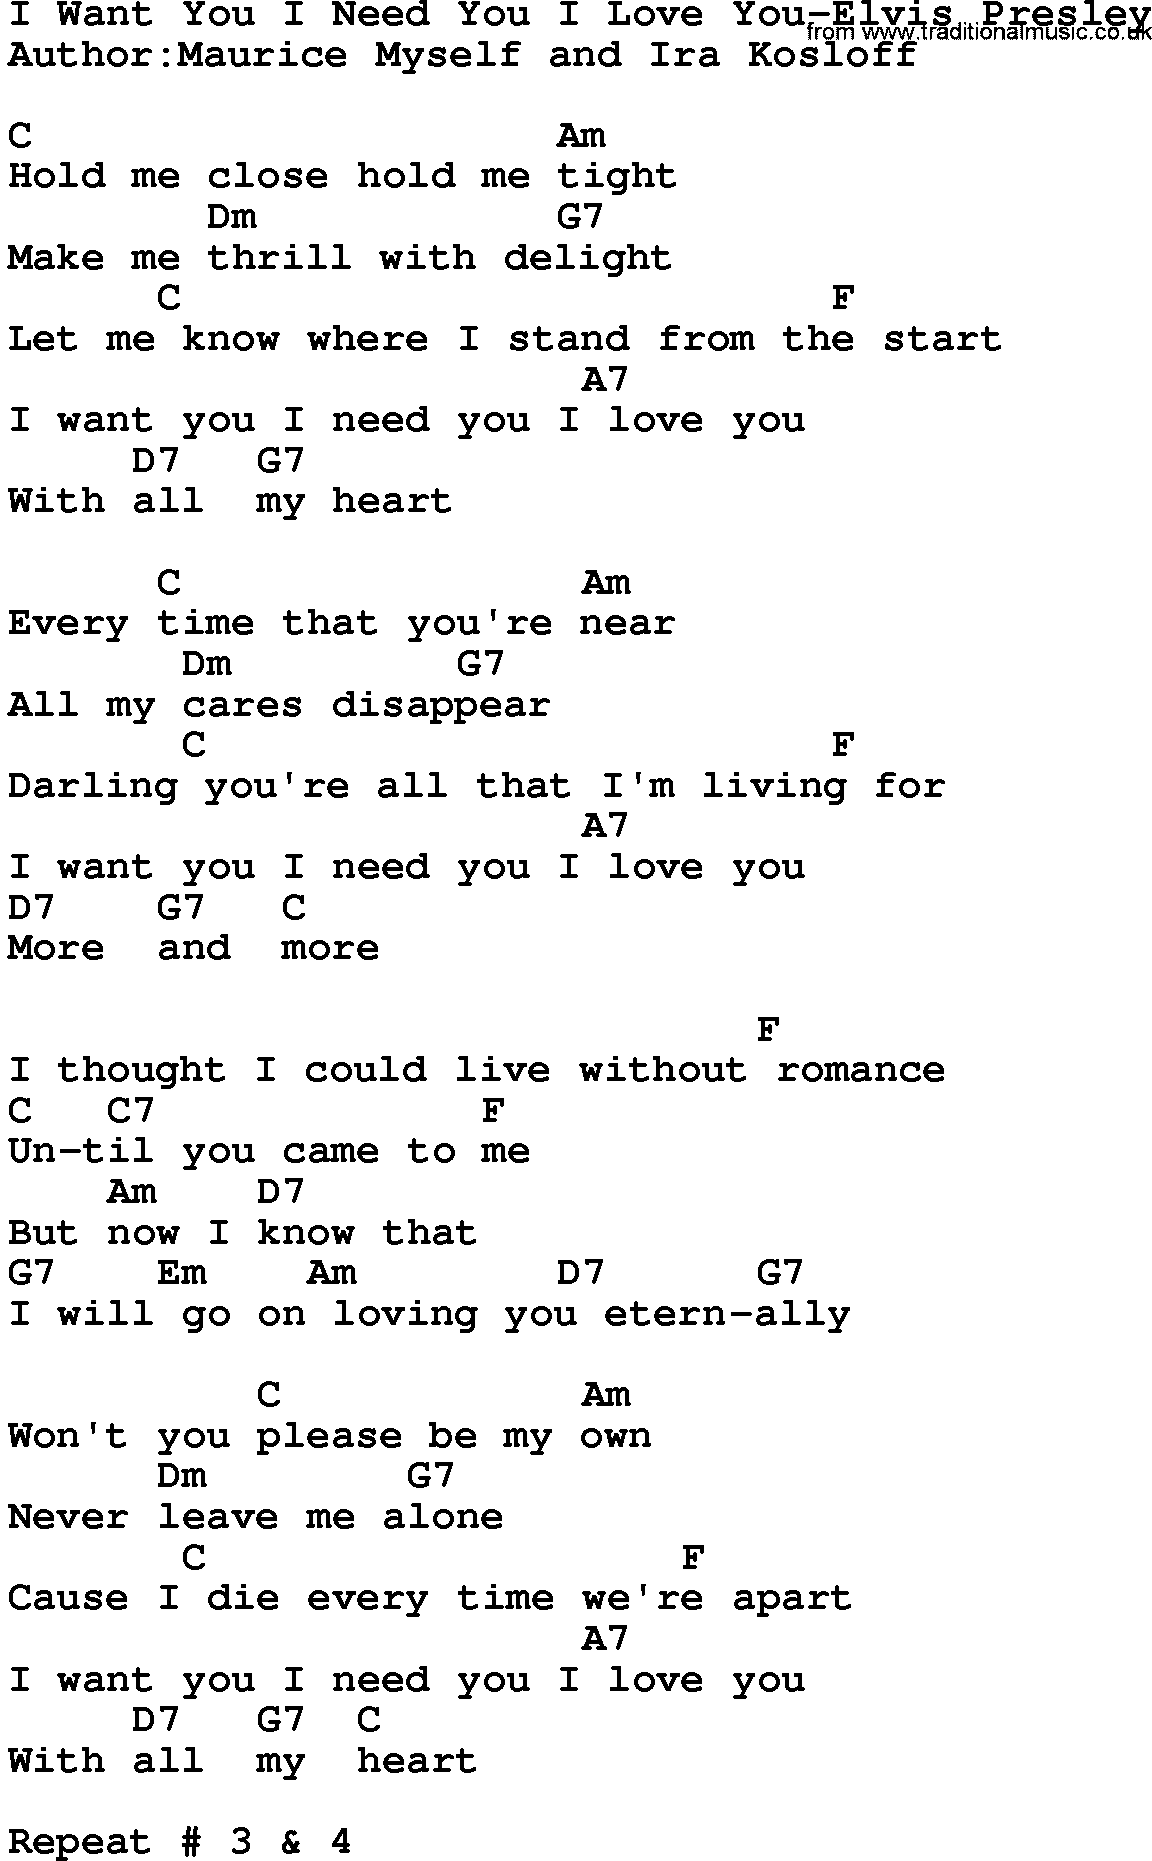 Country music song: I Want You I Need You I Love You-Elvis Presley lyrics and chords